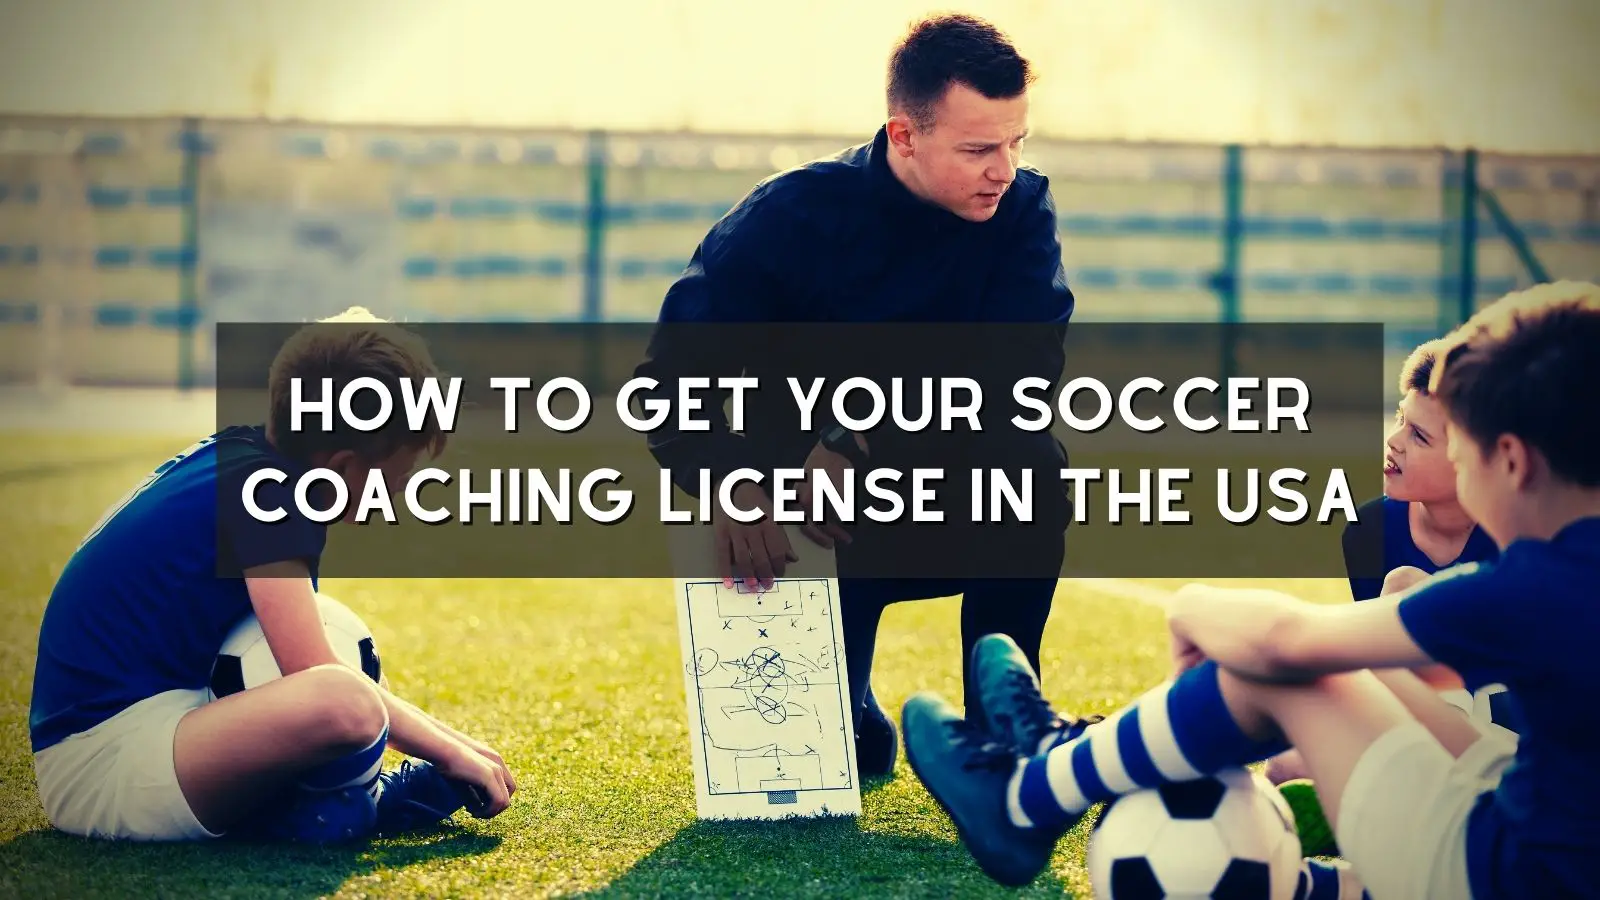 How To Get Your Soccer Coaching License In The USA